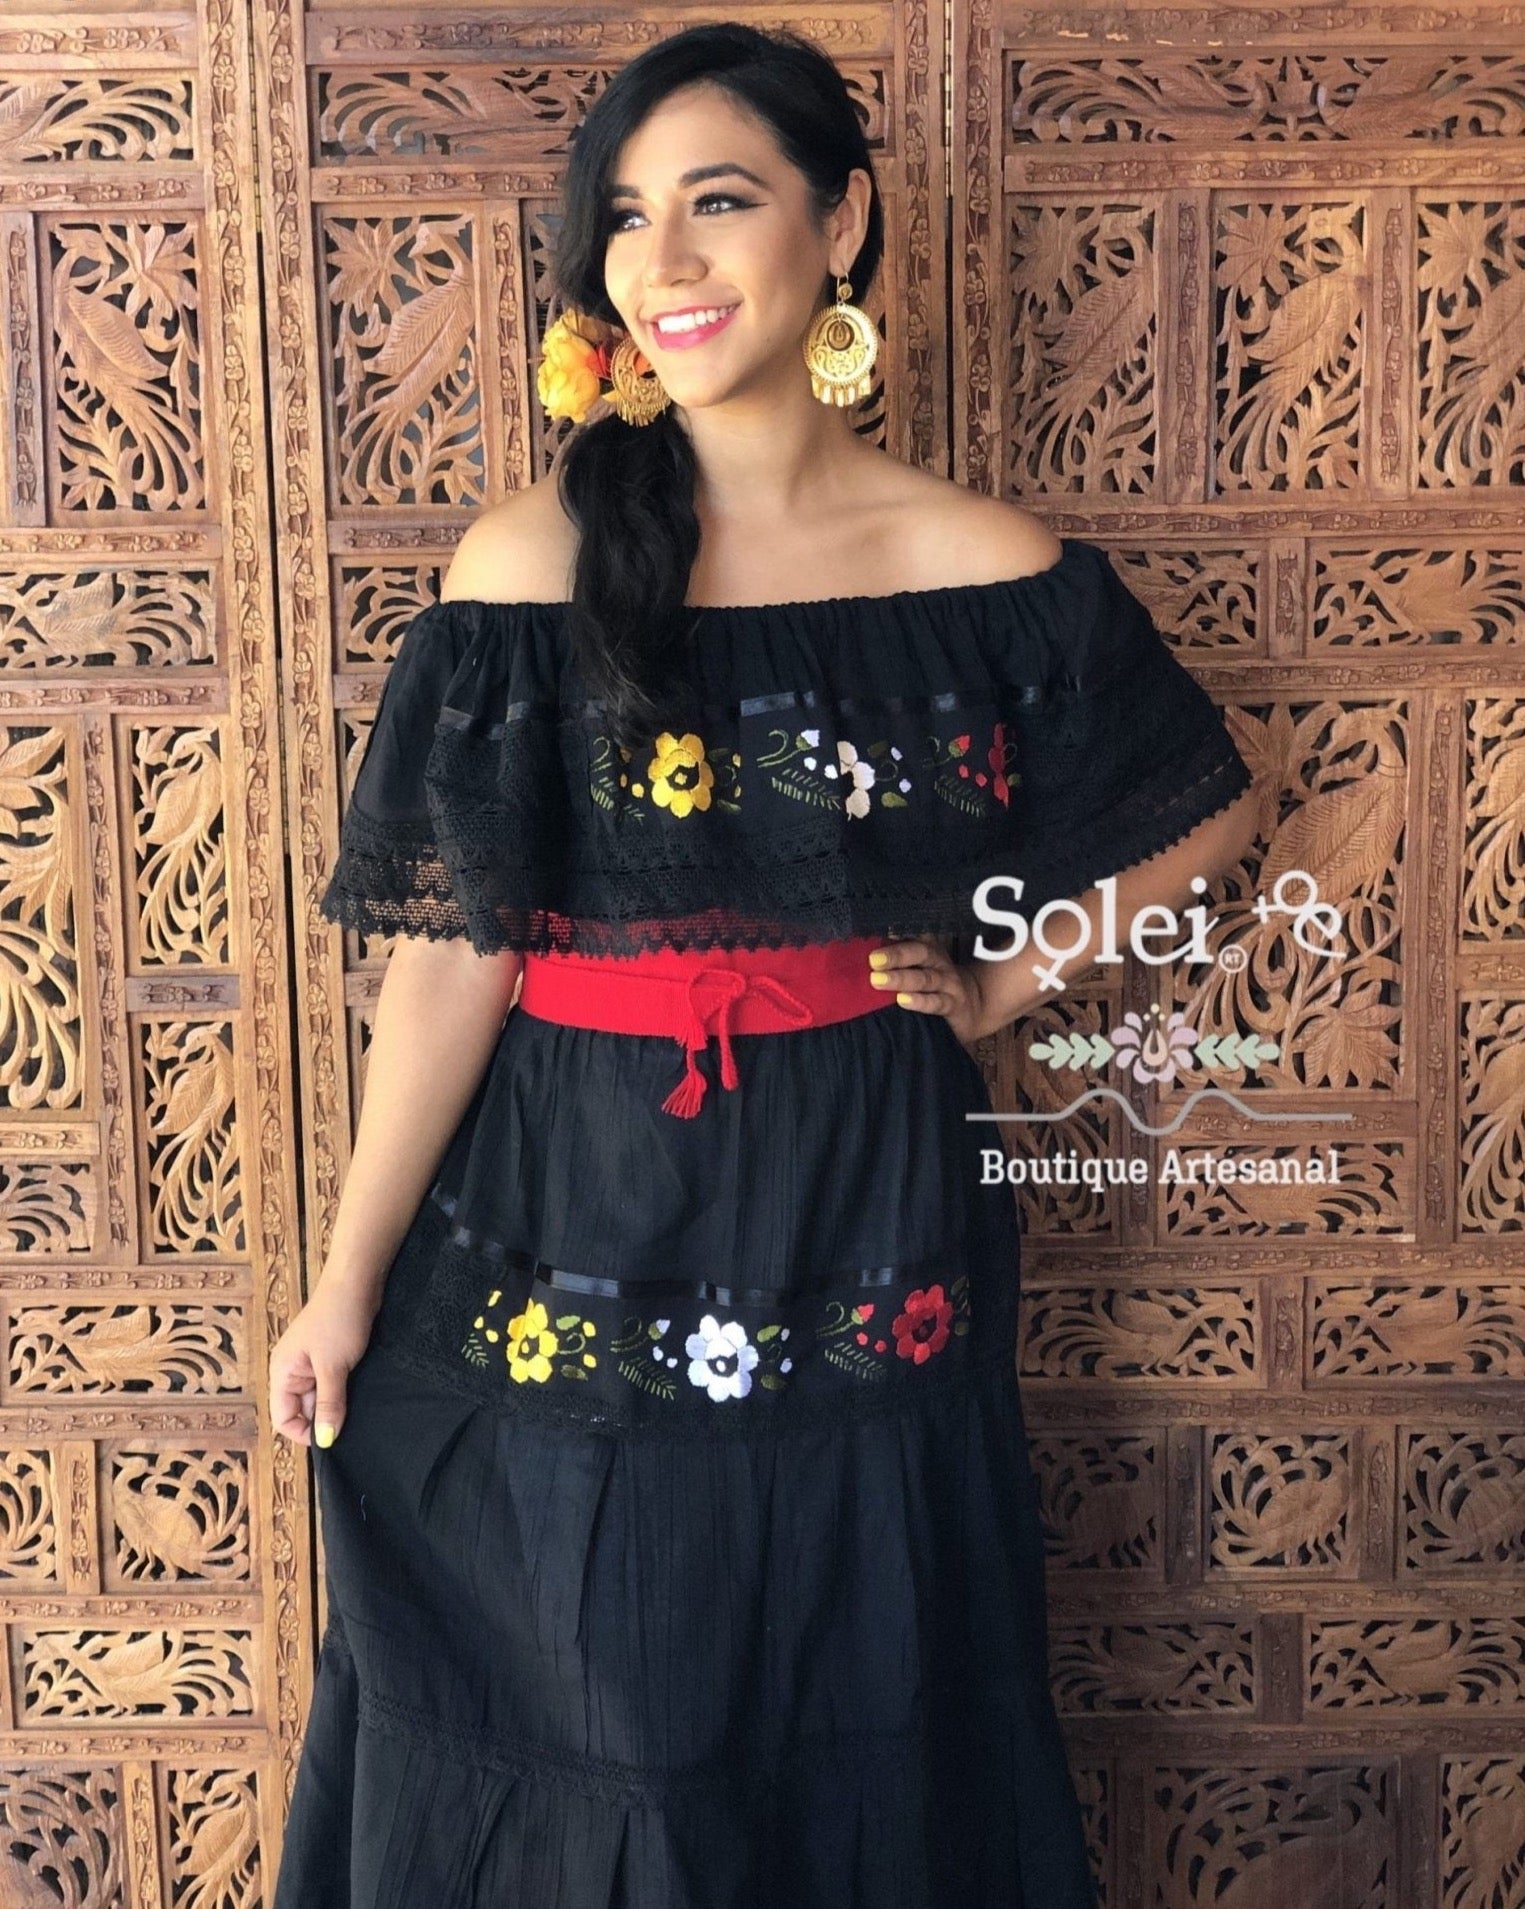 Lace Trim Peasant Dress. Mexican Off the Shoulder Dress. Floral Embroidered Dress. Mexican Artisanal Dress. - Solei Store